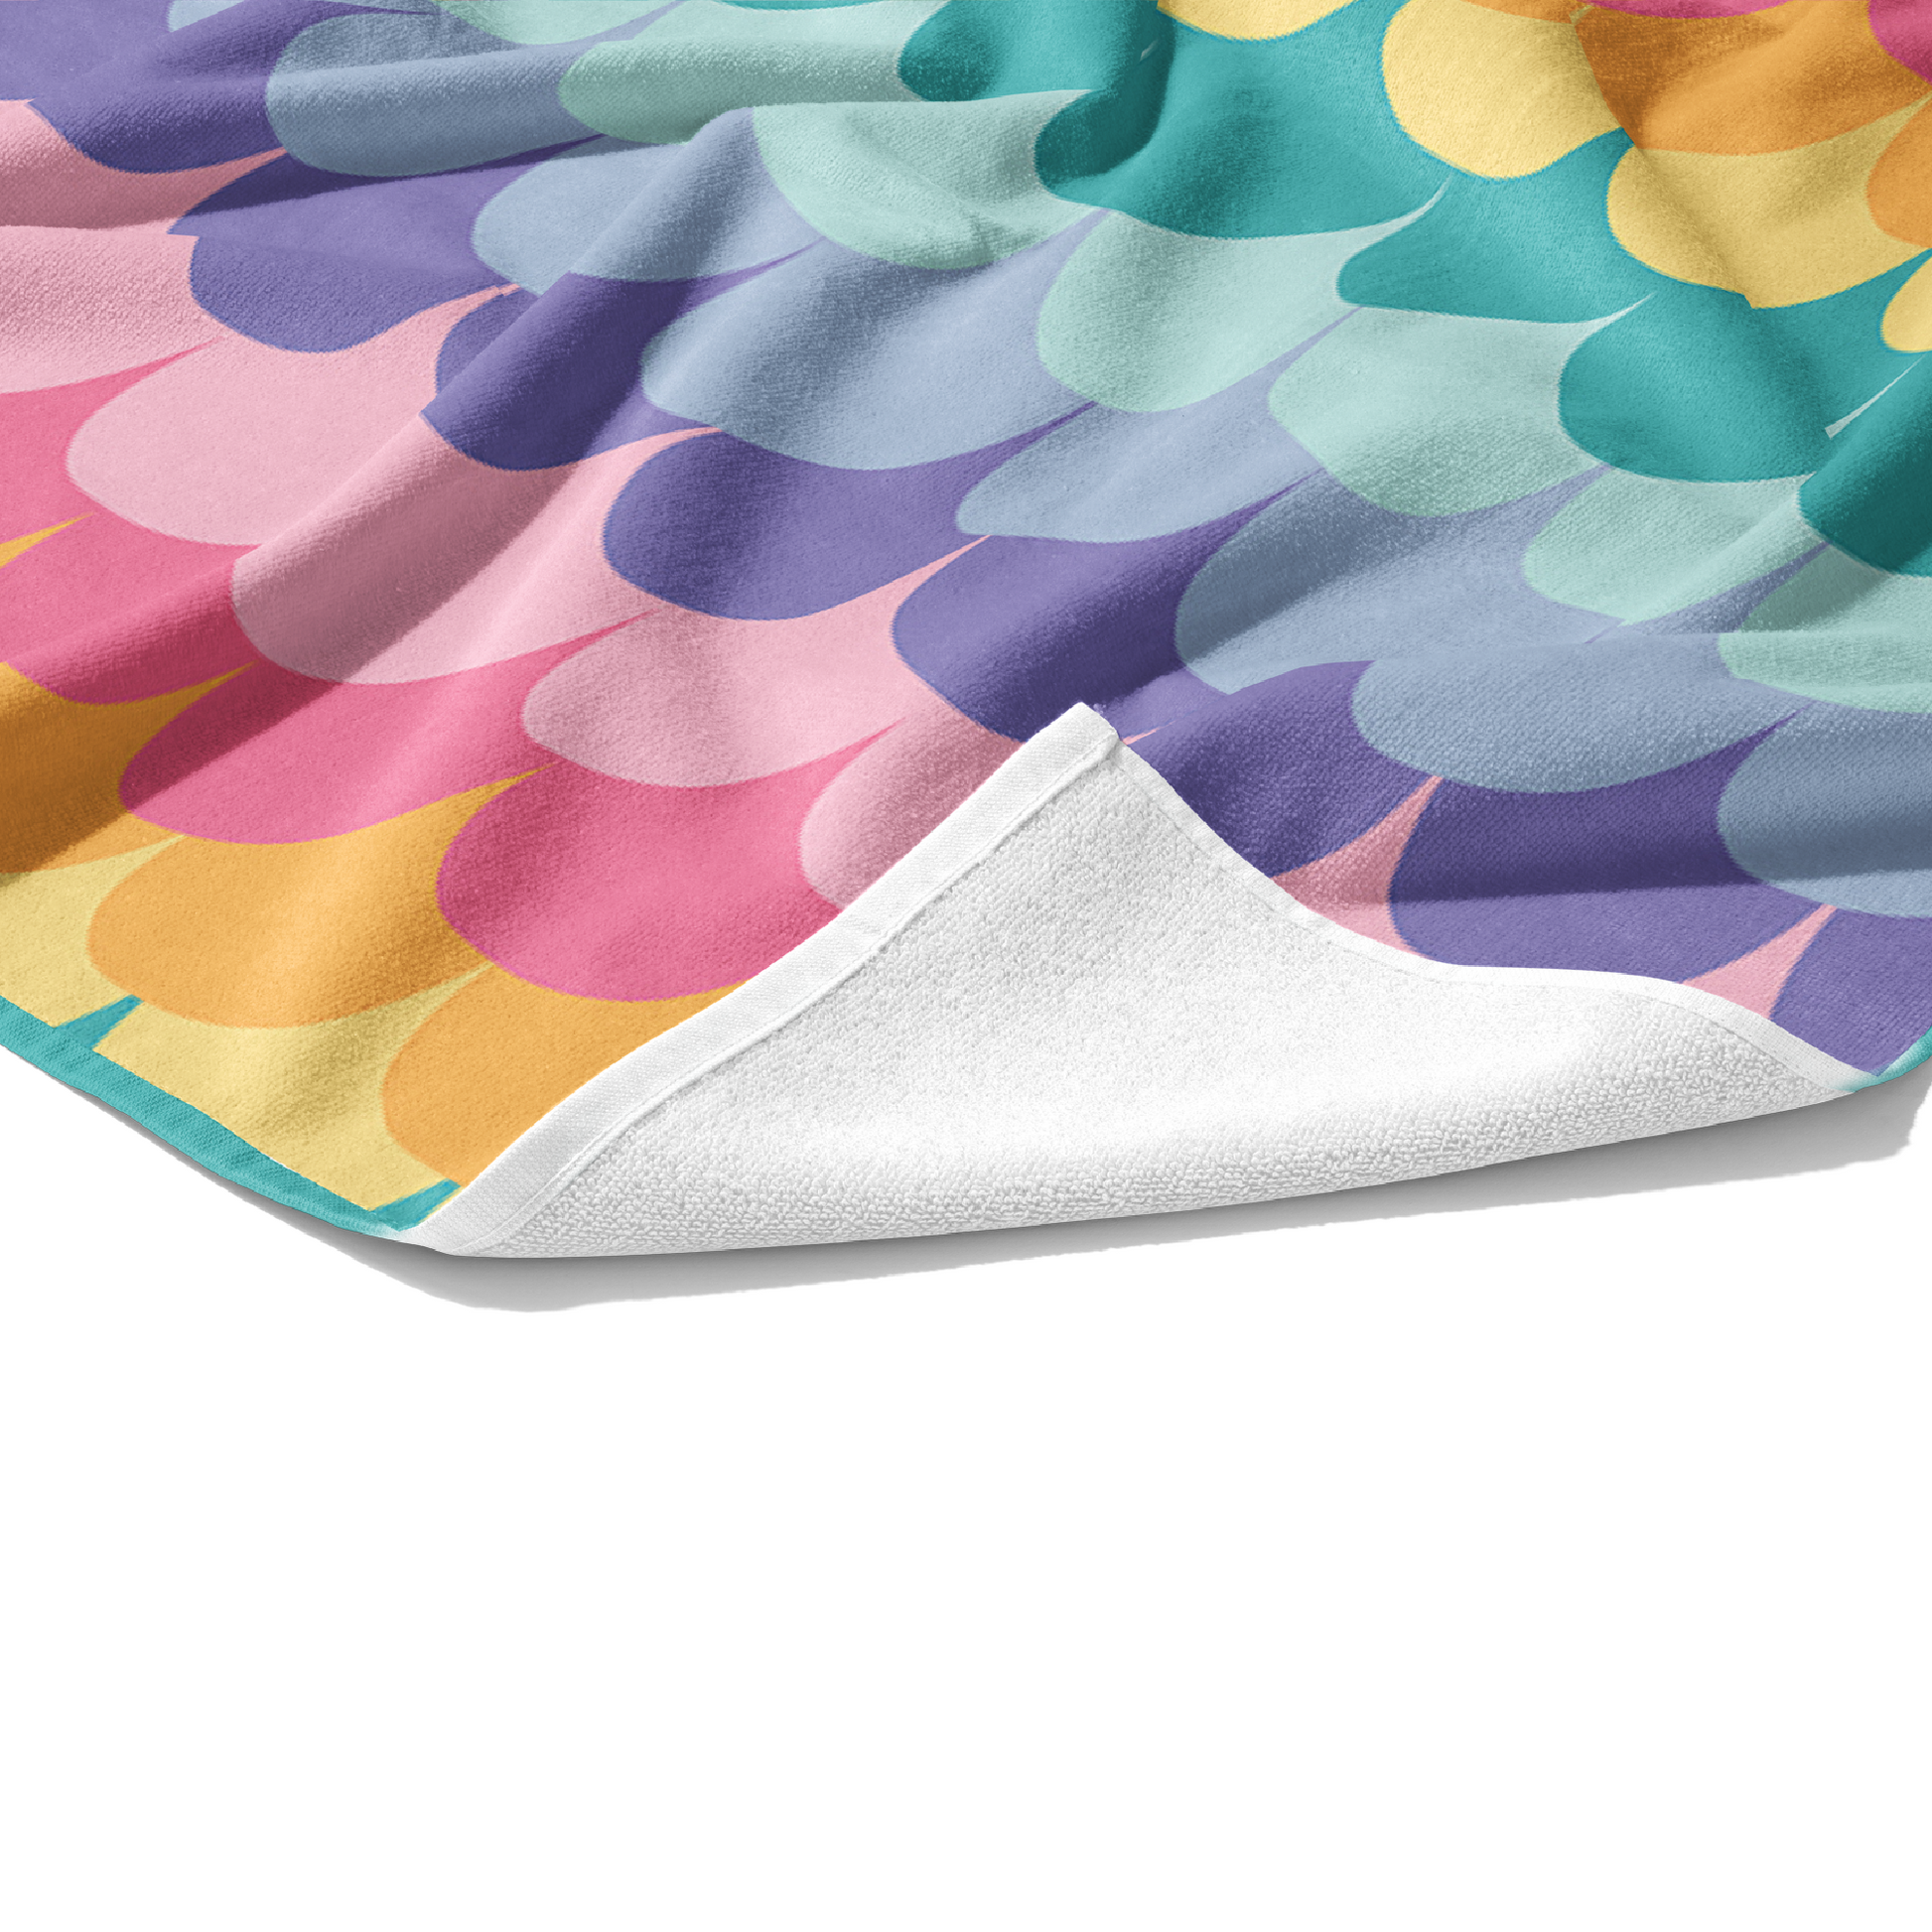 Plush white cotton towel with aqua, light blue, lavender, purple, light pink, pink, orange, and yellow rainbow mermaid scales print on the front.